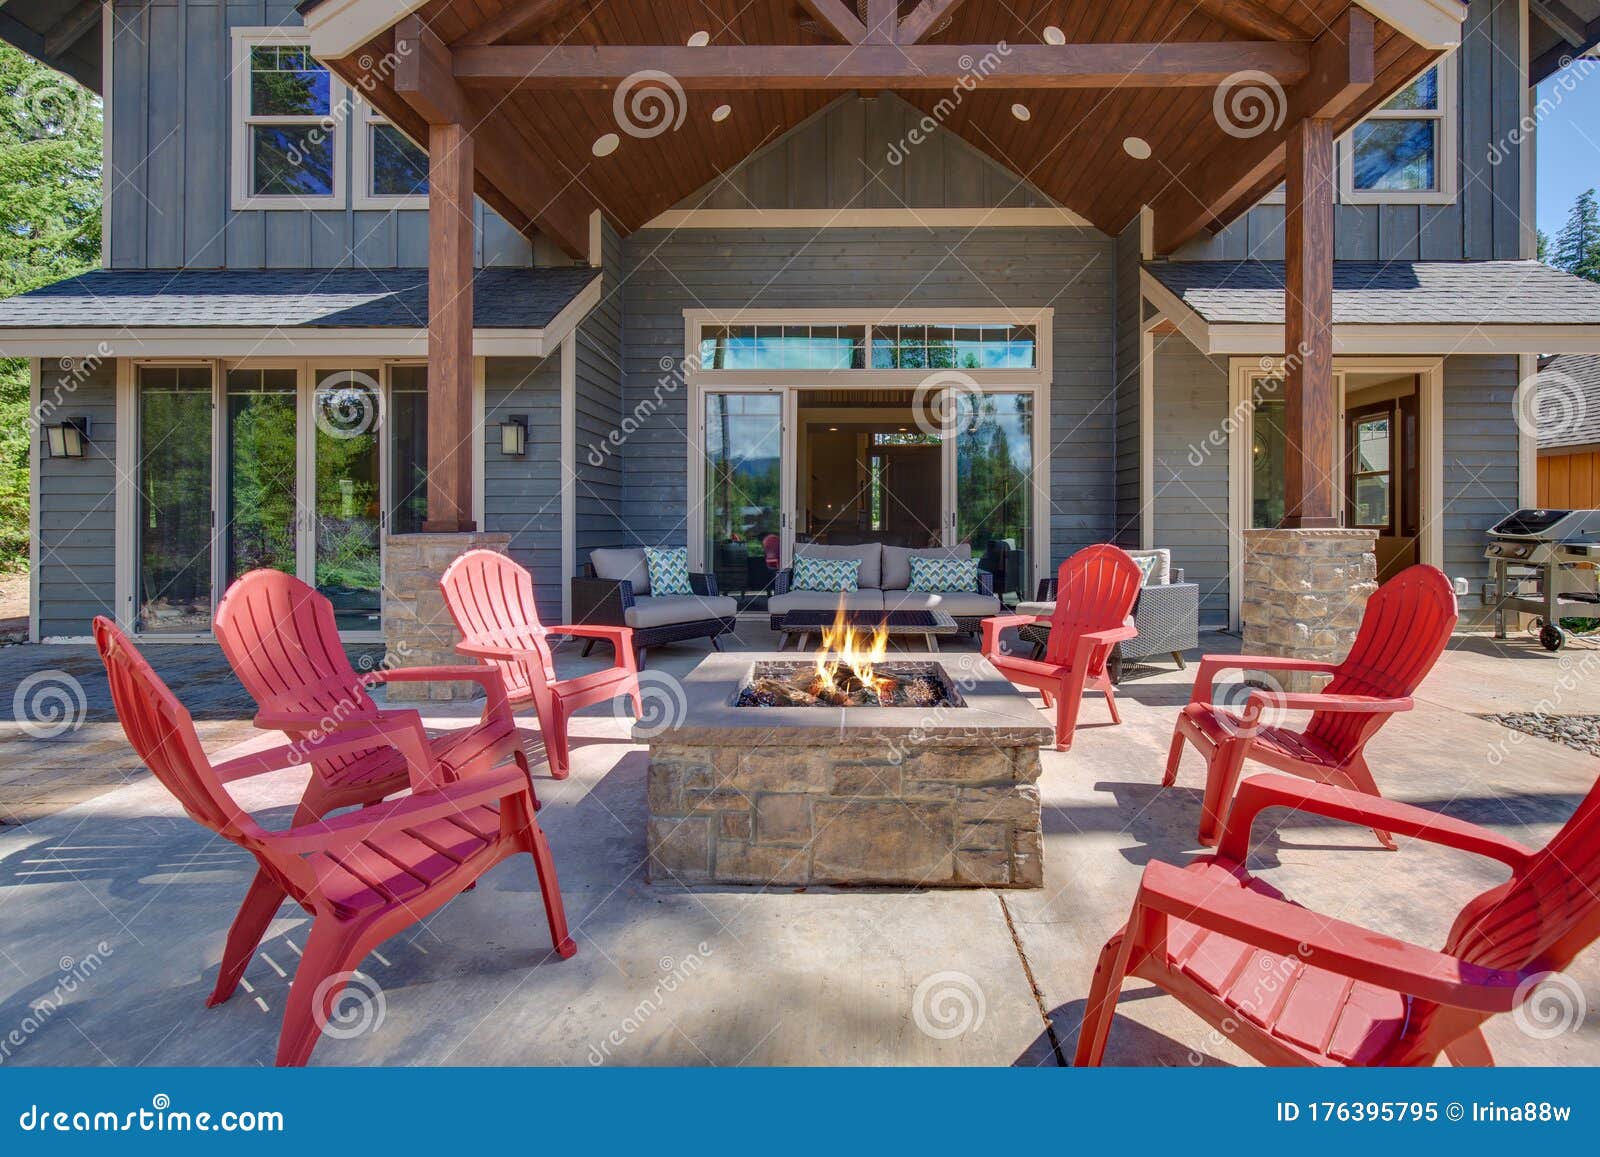 back yard with fire pit and red chairs near newly bild luxury real estate home with forest biew and green grass